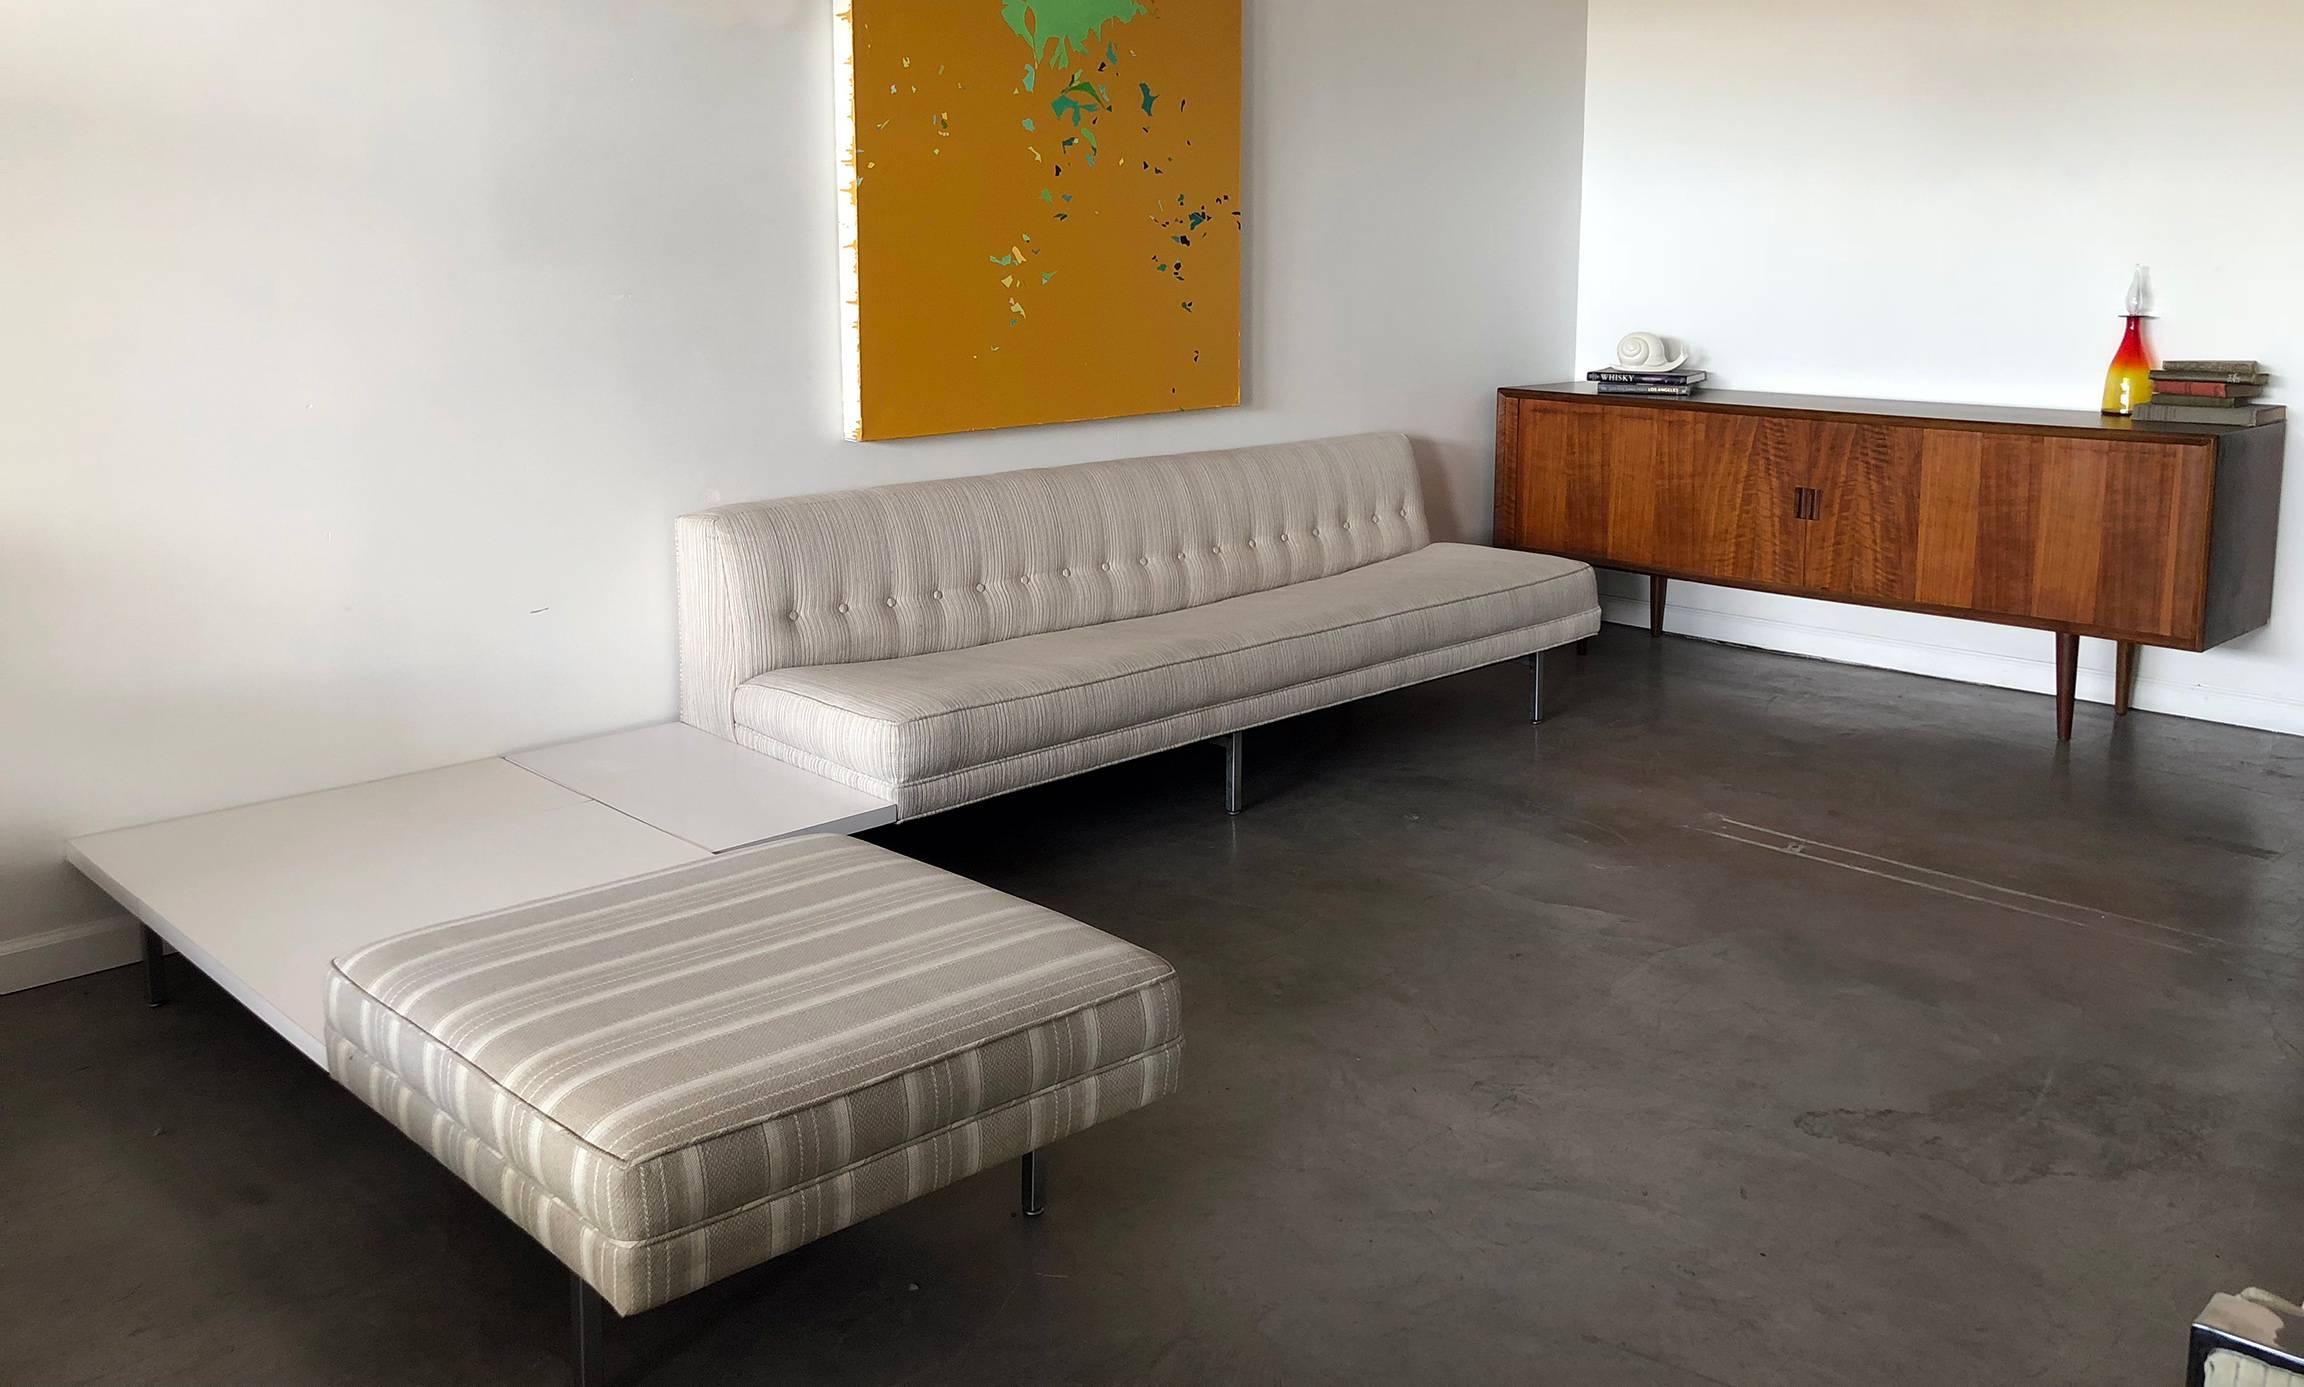 A stunning, iconic piece of Mid-Century Modern design, a George Nelson for Herman Miller sectional sofa! The sofa is in good vintage condition with neutral fabric and attached side tables with white laminate tops.

The set is two separate pieces